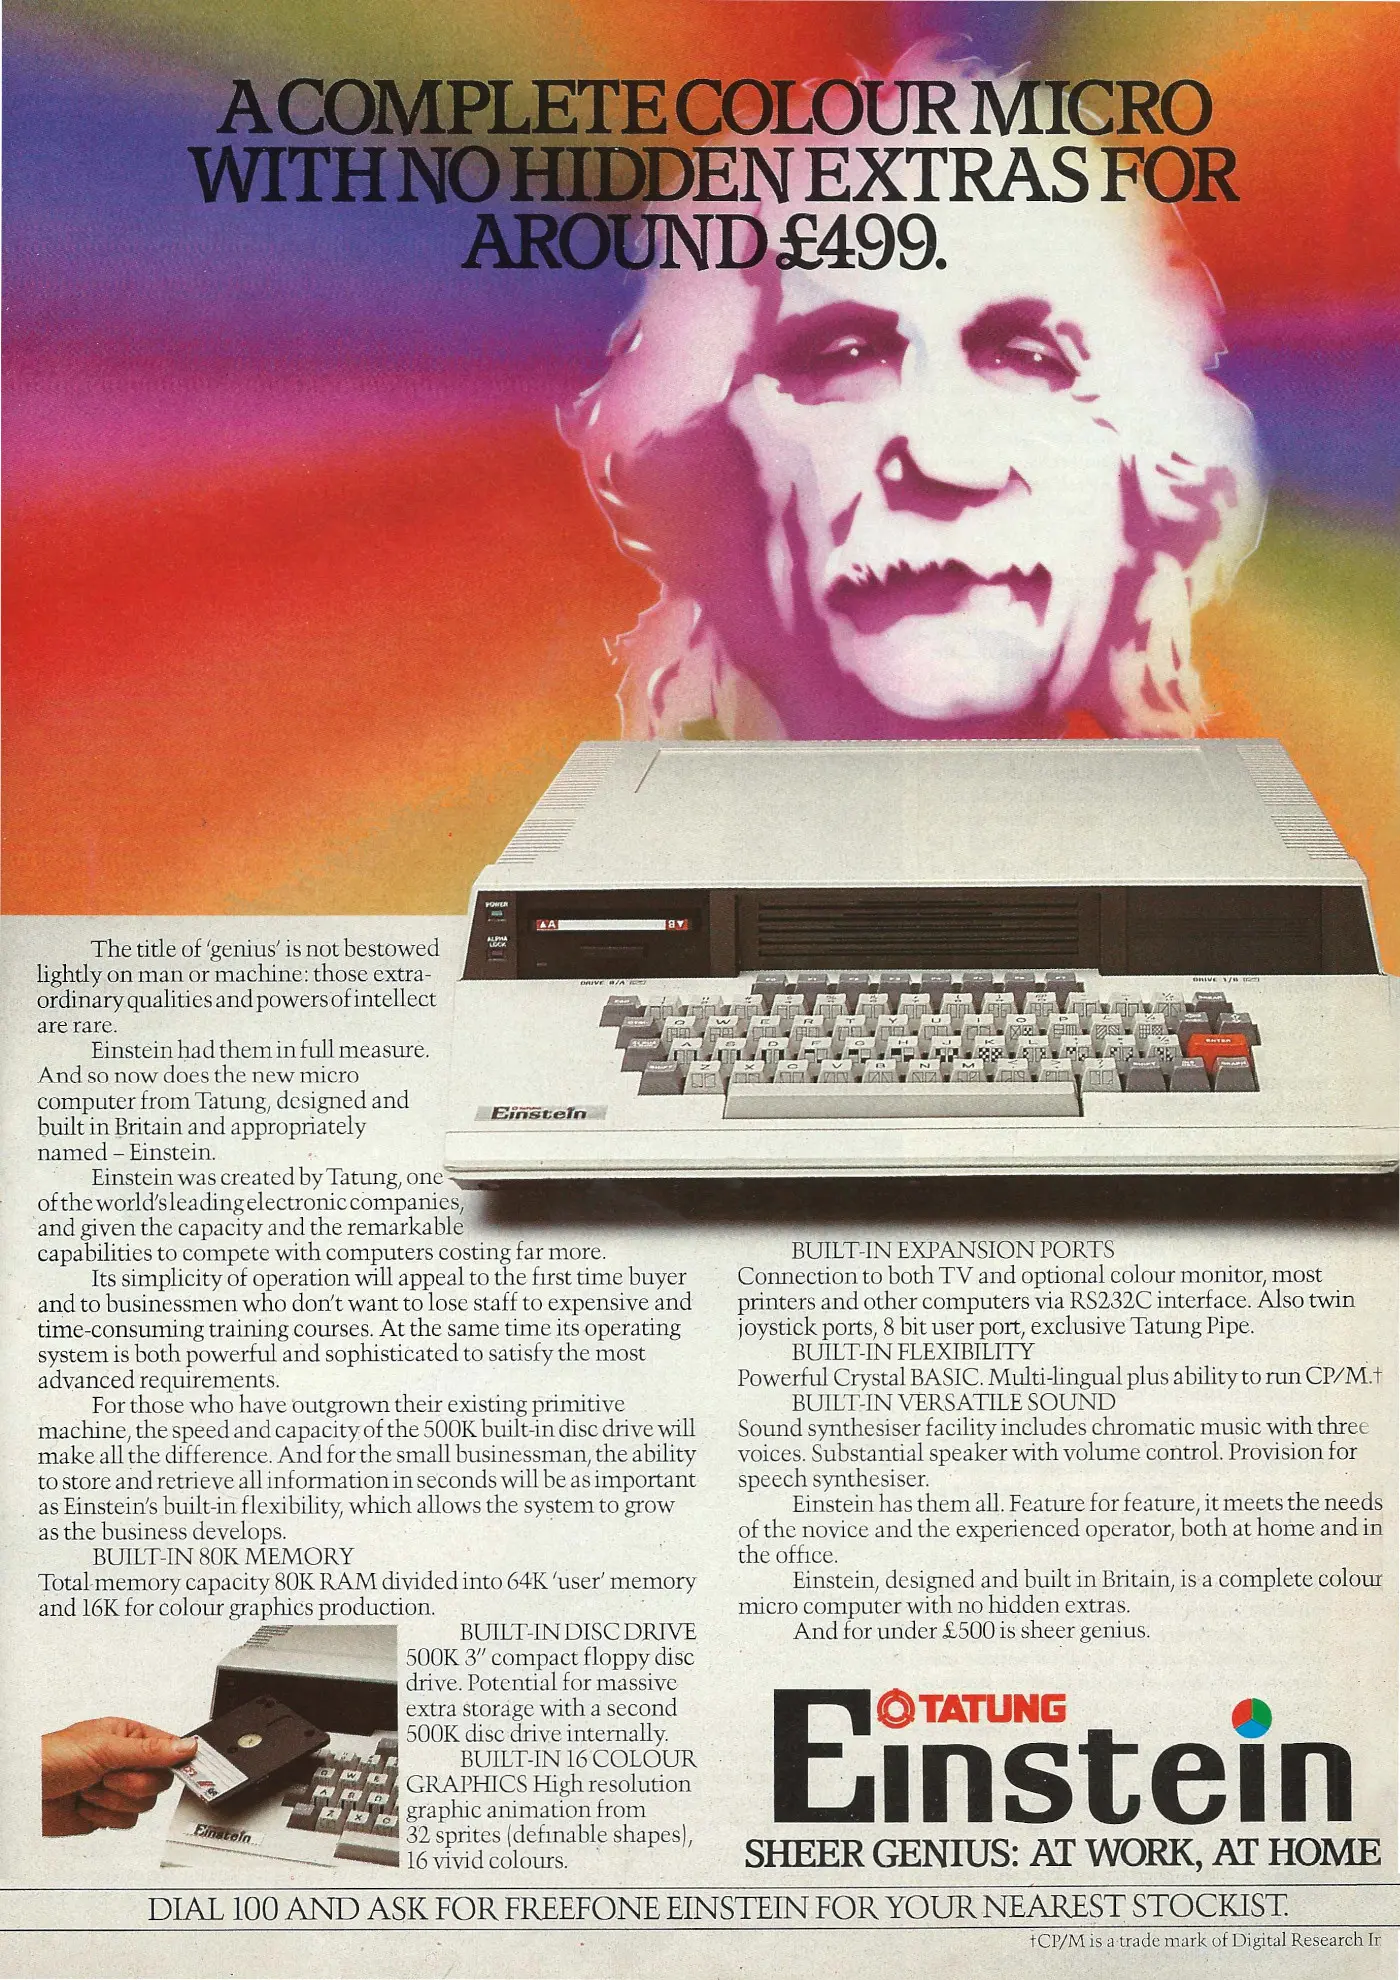 Tatung Advert: A Complete Colour Micro With No Hidden Extras for Around £499, from The Micro User, September 1984